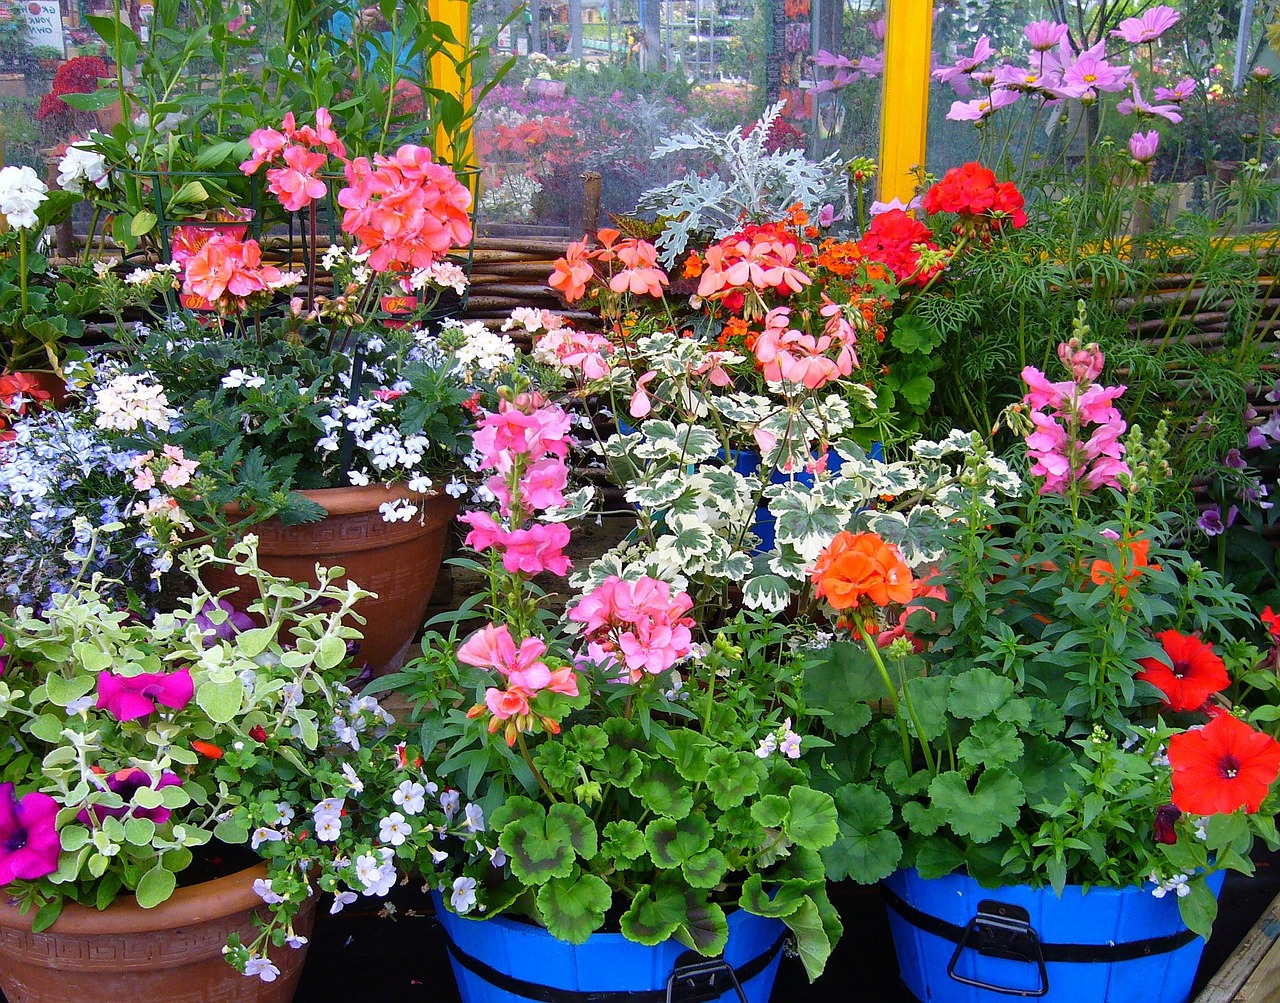 Outdoor Potted Plants In Winter When, How To Keep Outdoor Plants Alive In Winter